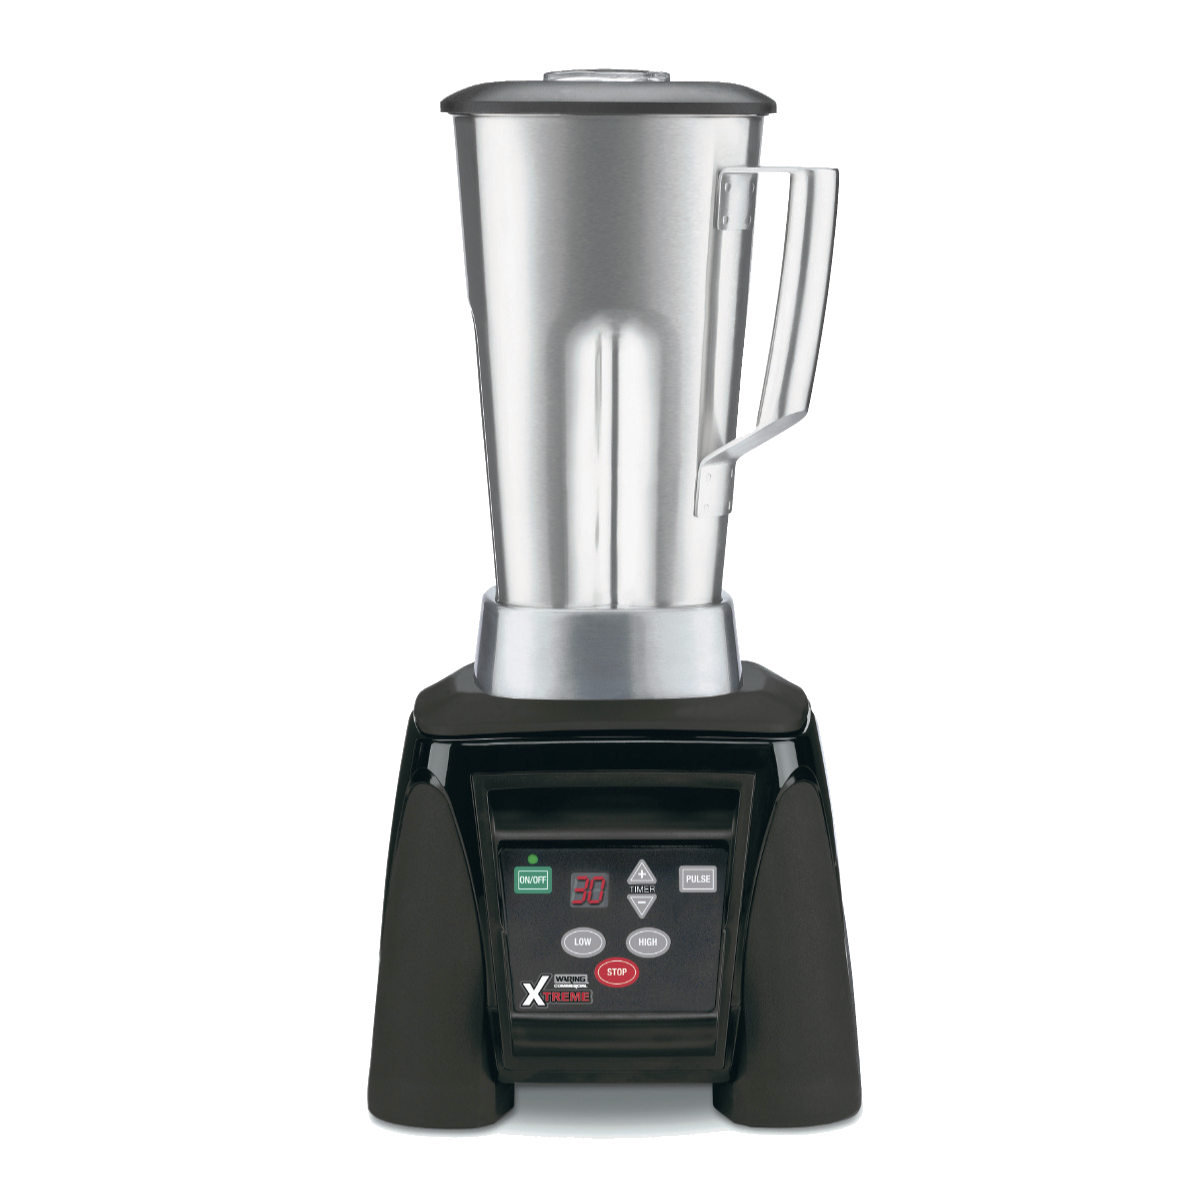 Waring Commercial Hi-Power Electronic Keypad Blender Timer 64-oz. Stainless Container